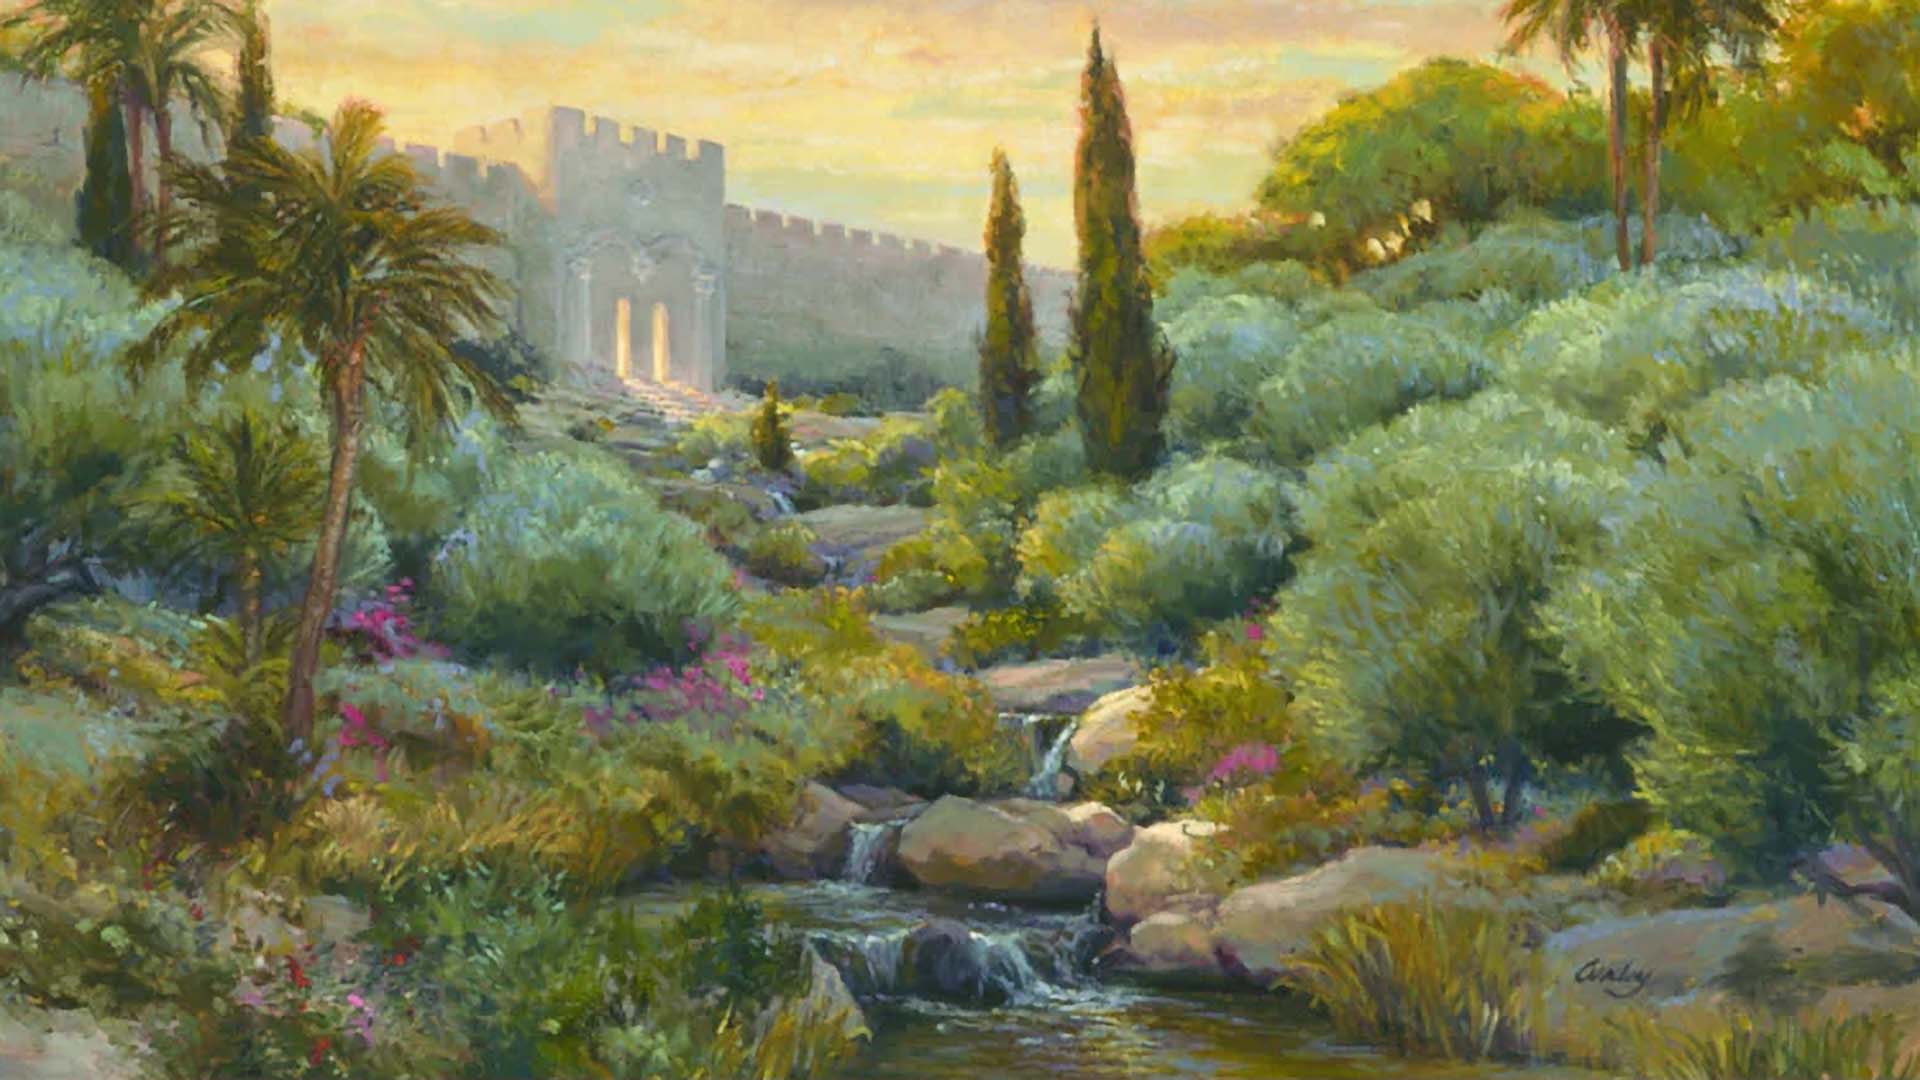 A painting by Linda Curley Christensen of a gate in Jerusalem known as the Beautiful Gate.